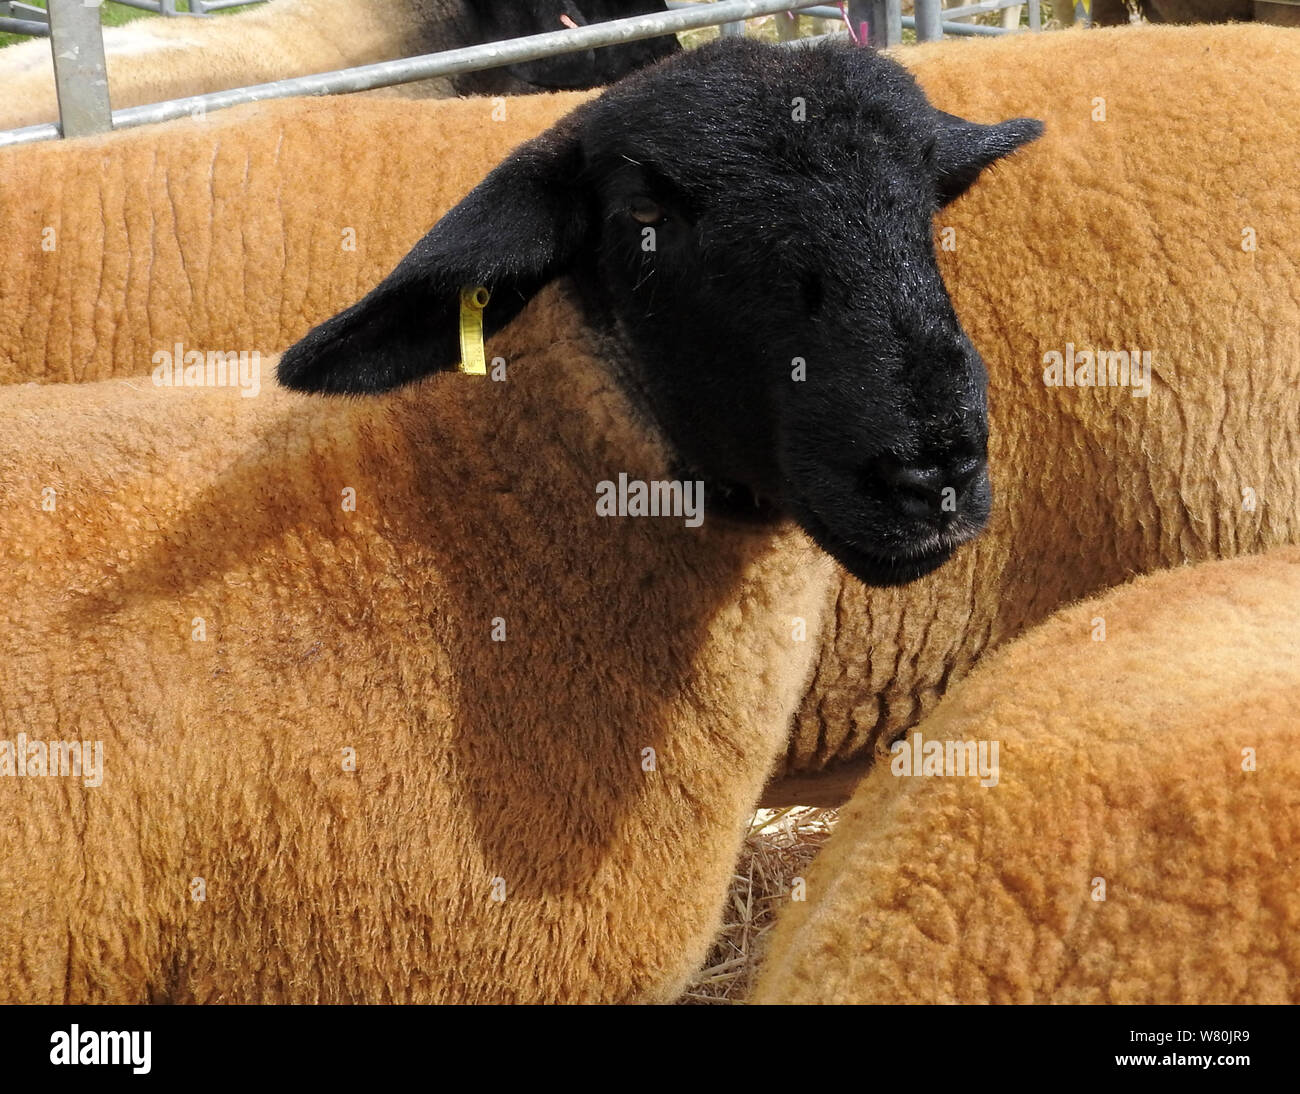 Wigtown horticultural and poultry show 2019  - A  (dyed) Suffolk Sheep Stock Photo